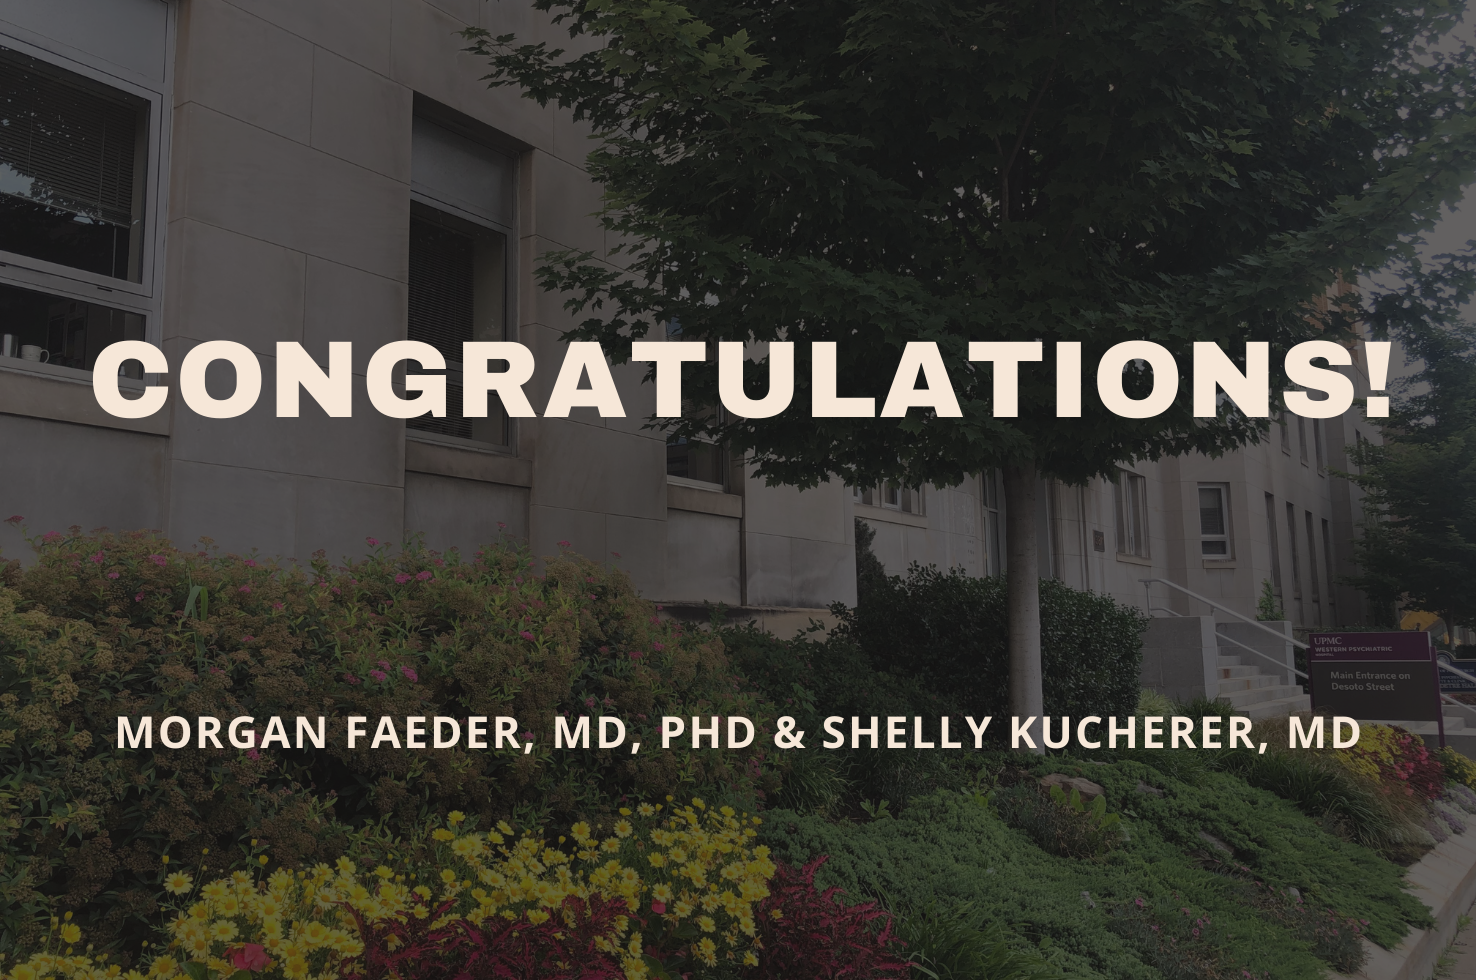 Morgan Faeder, MD, PhD & Shelly Kucherer, MD, Receive UPMC Physician Excellence Awards